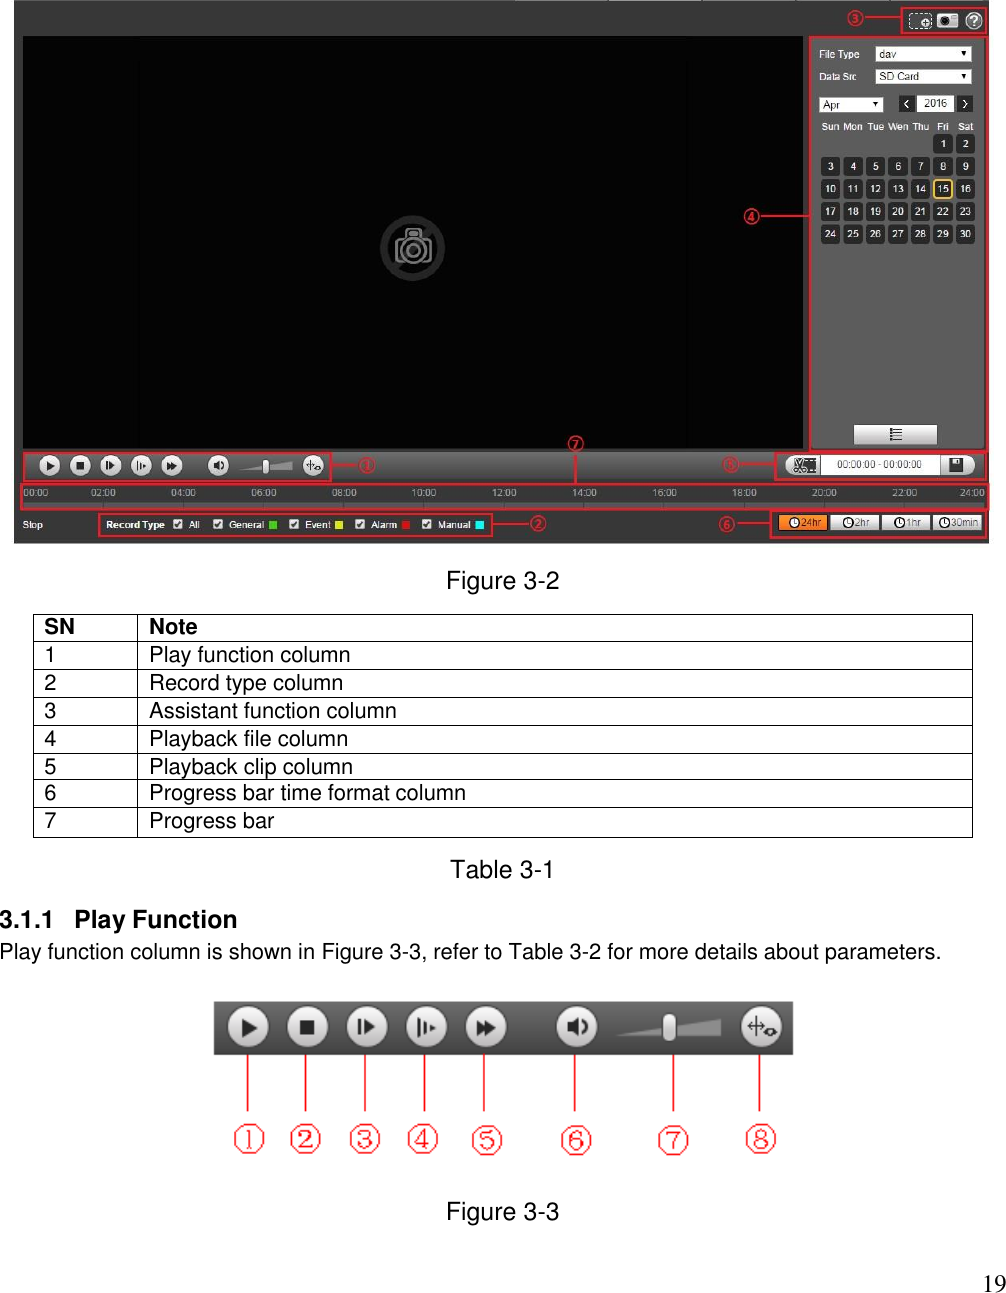                                                                              19  Figure 3-2 SN Note 1 Play function column 2 Record type column 3 Assistant function column 4 Playback file column  5 Playback clip column  6 Progress bar time format column  7 Progress bar  Table 3-1 3.1.1  Play Function Play function column is shown in Figure 3-3, refer to Table 3-2 for more details about parameters.  Figure 3-3 